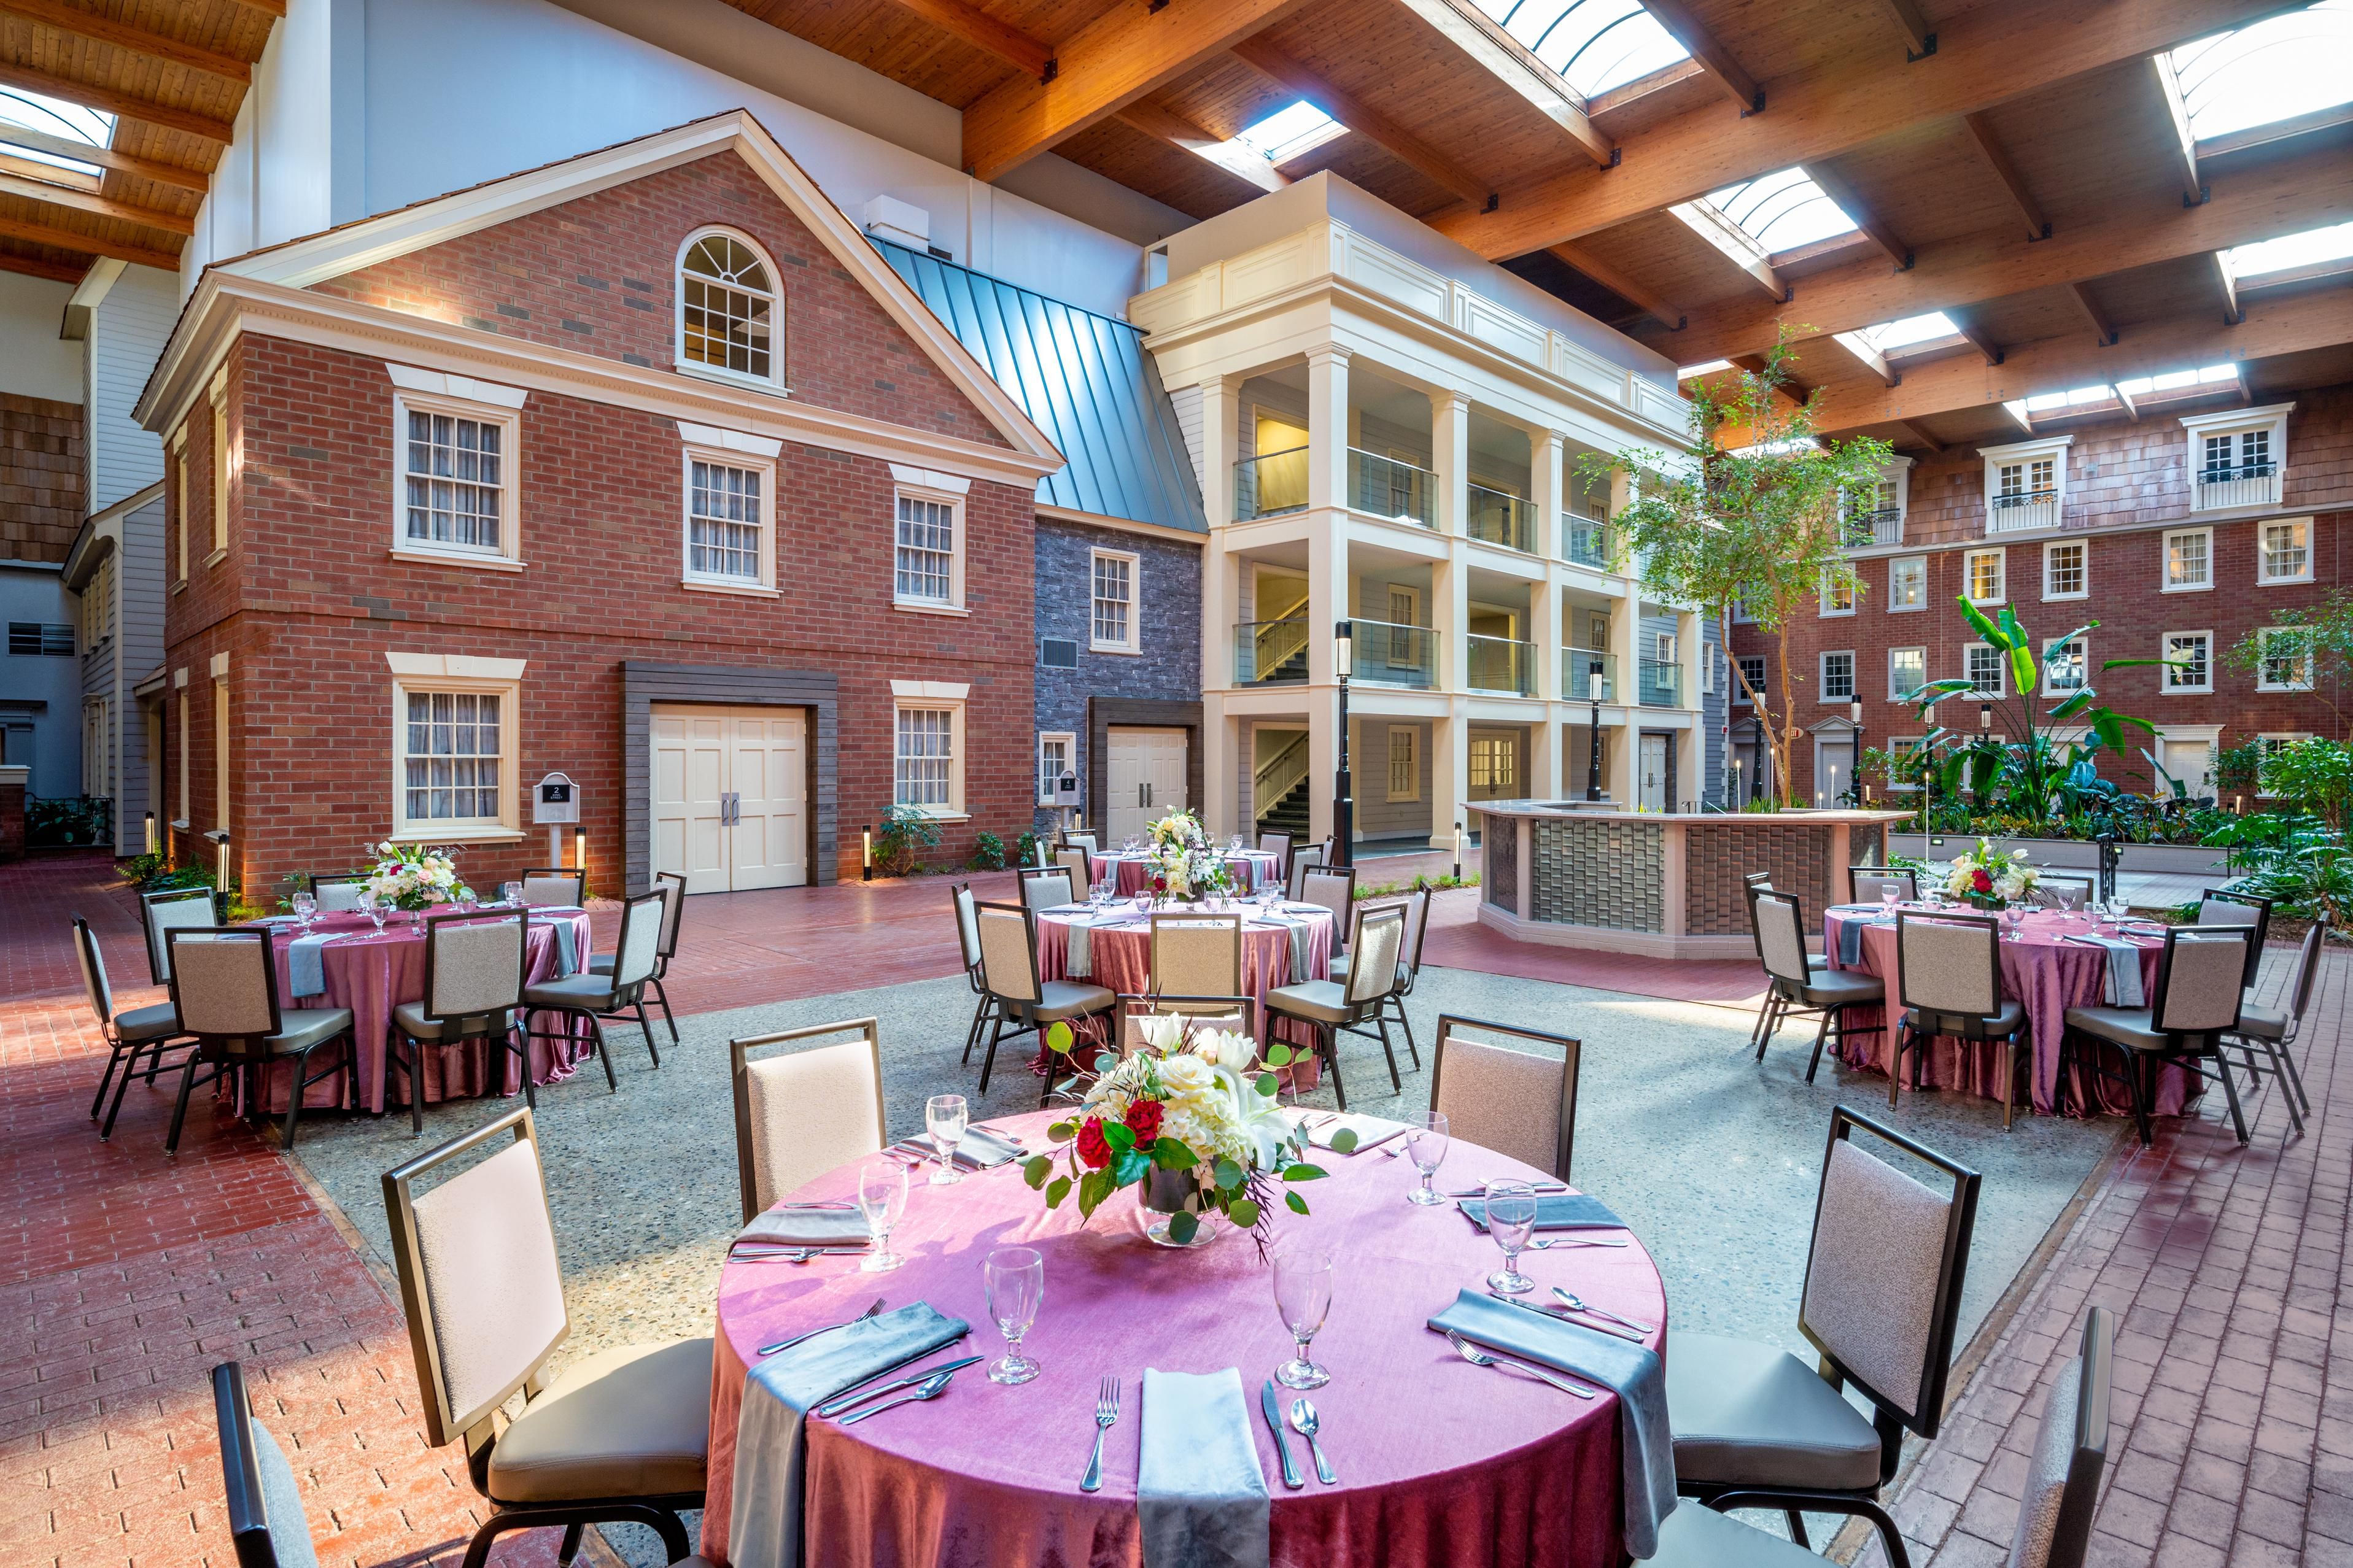 King Street Courtyard has open 34&#39; ceilings and natural lighting